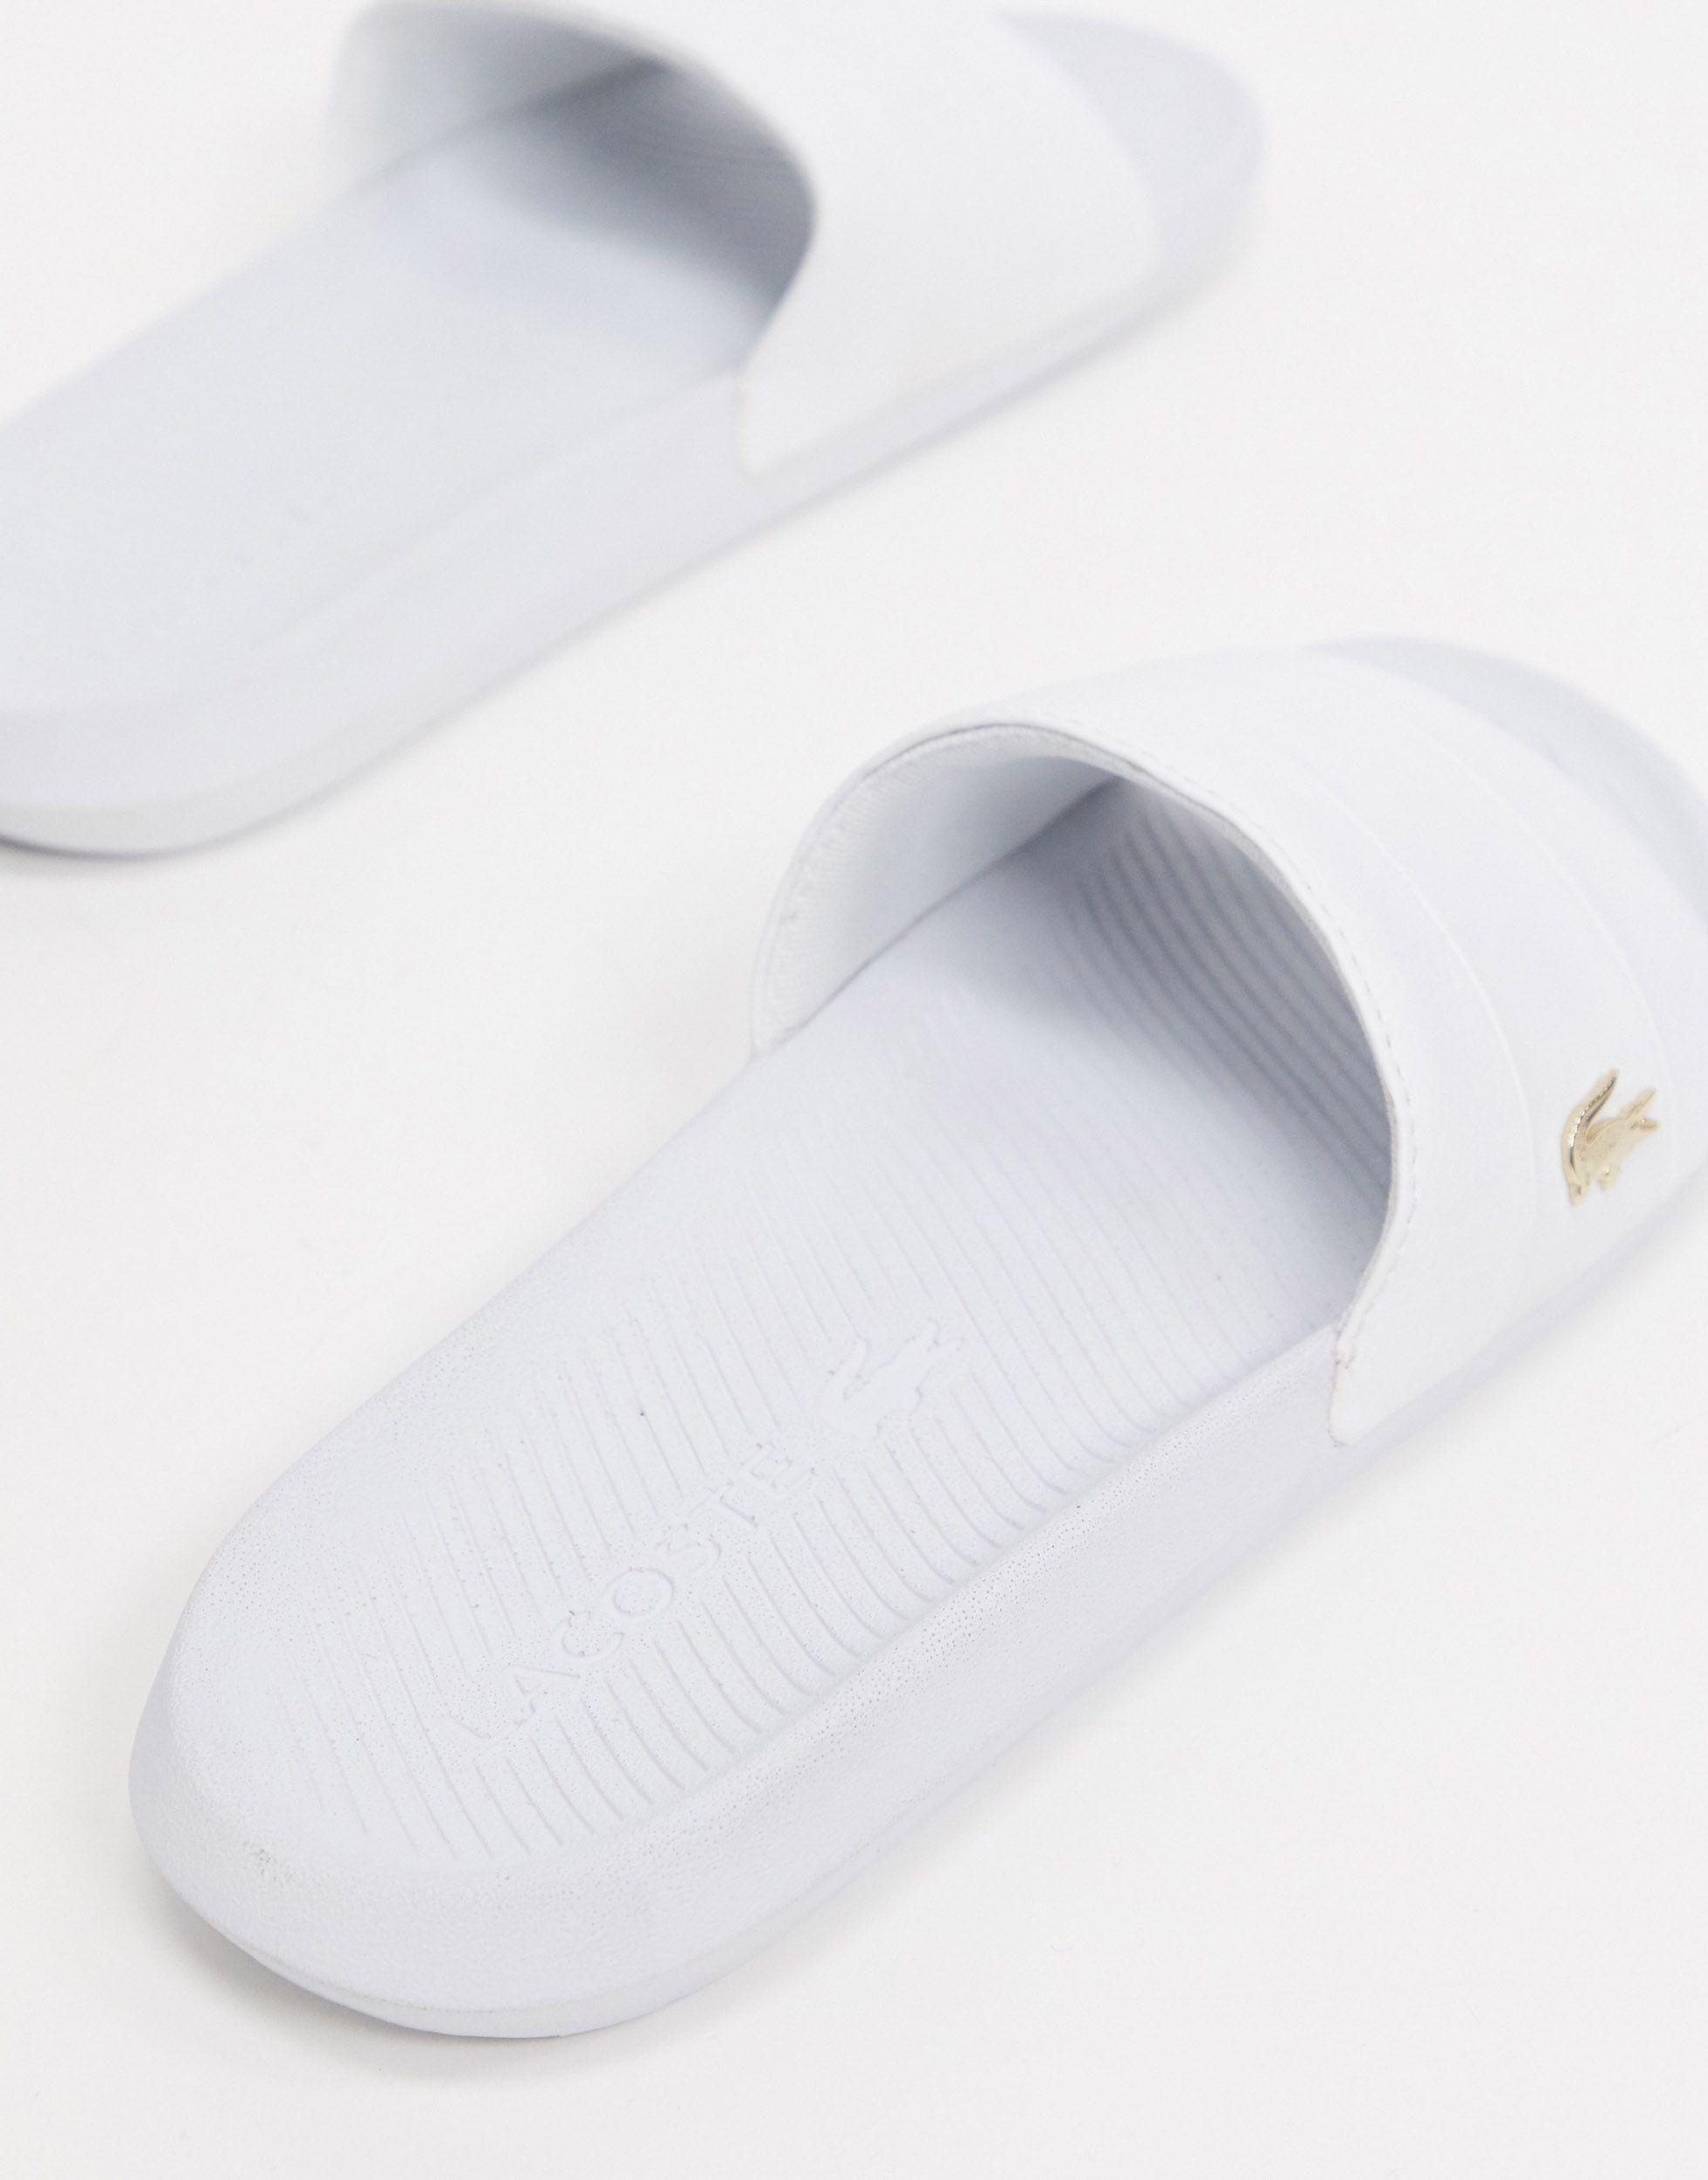 Lacoste Croco Sliders White With Gold Croc for Men - Lyst